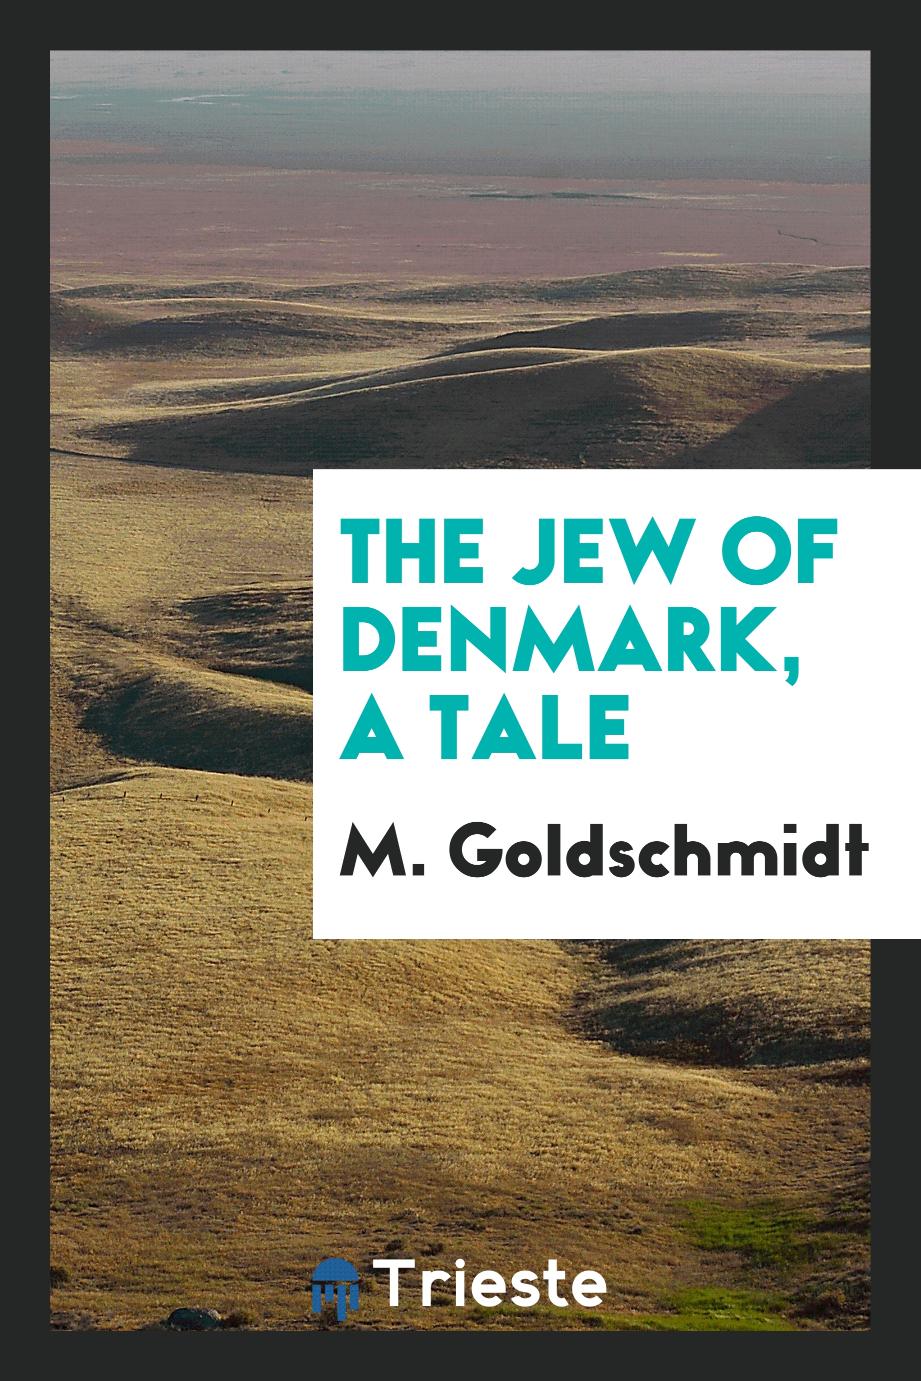 The Jew of Denmark, a tale